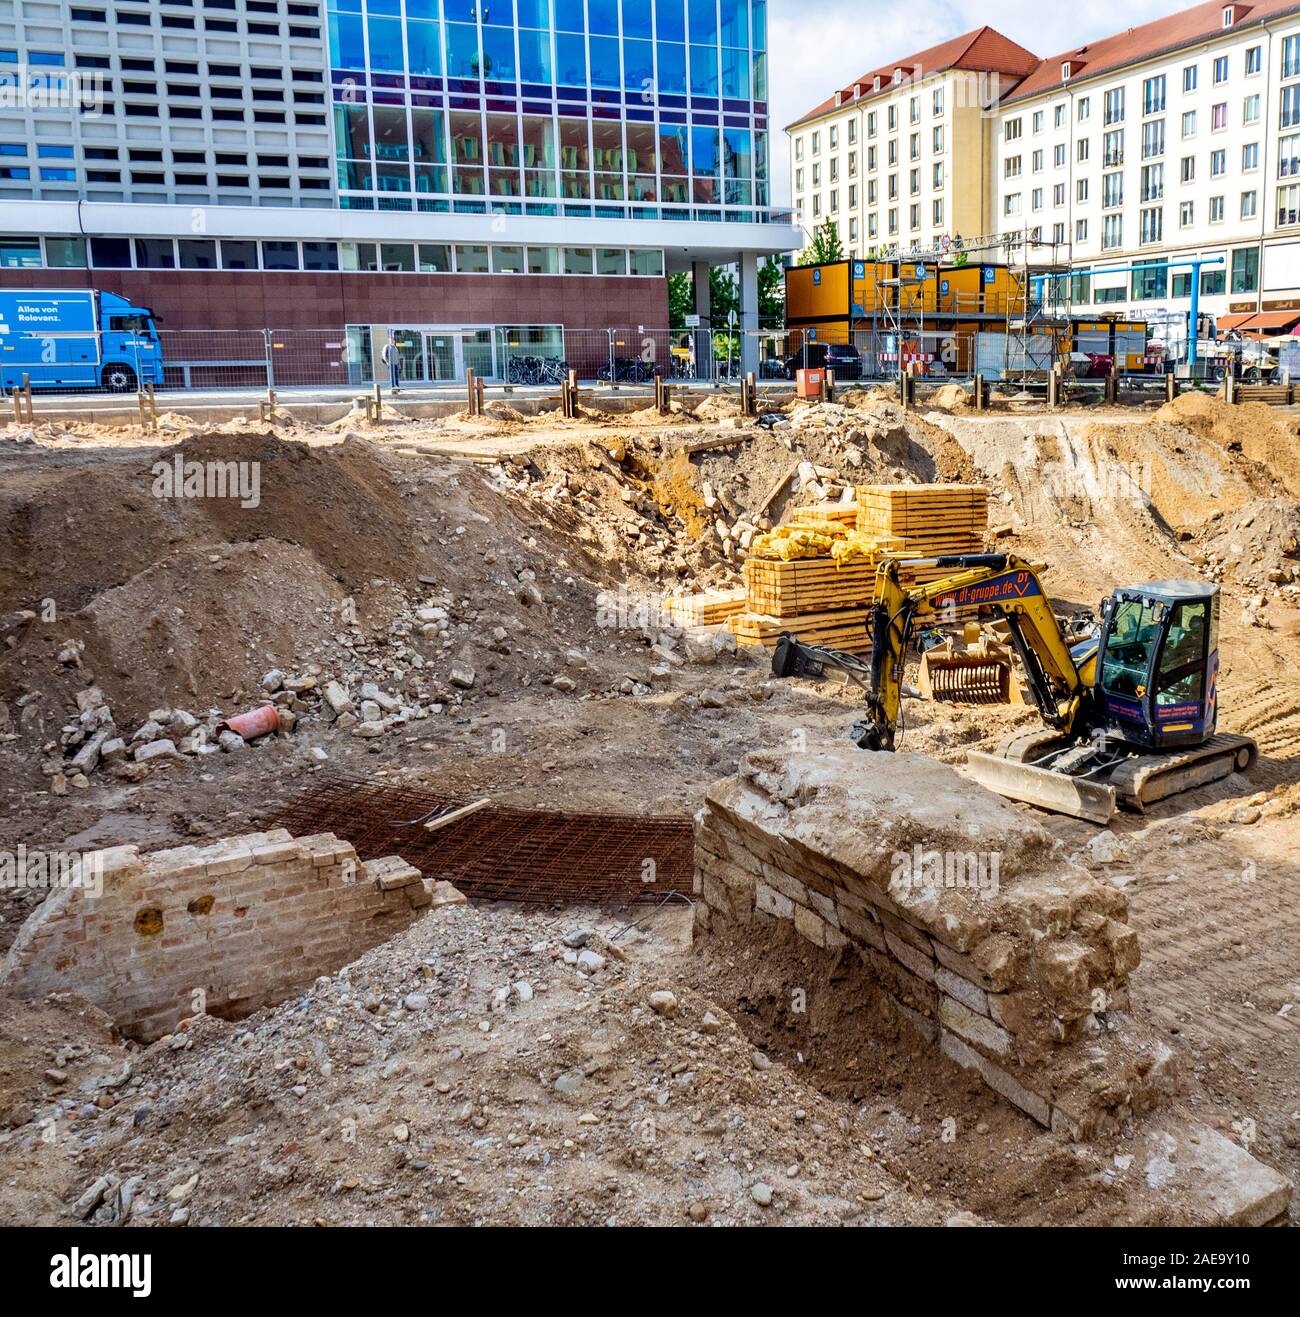 Excavator in building site in central Dresden Saxony Germany. Stock Photo